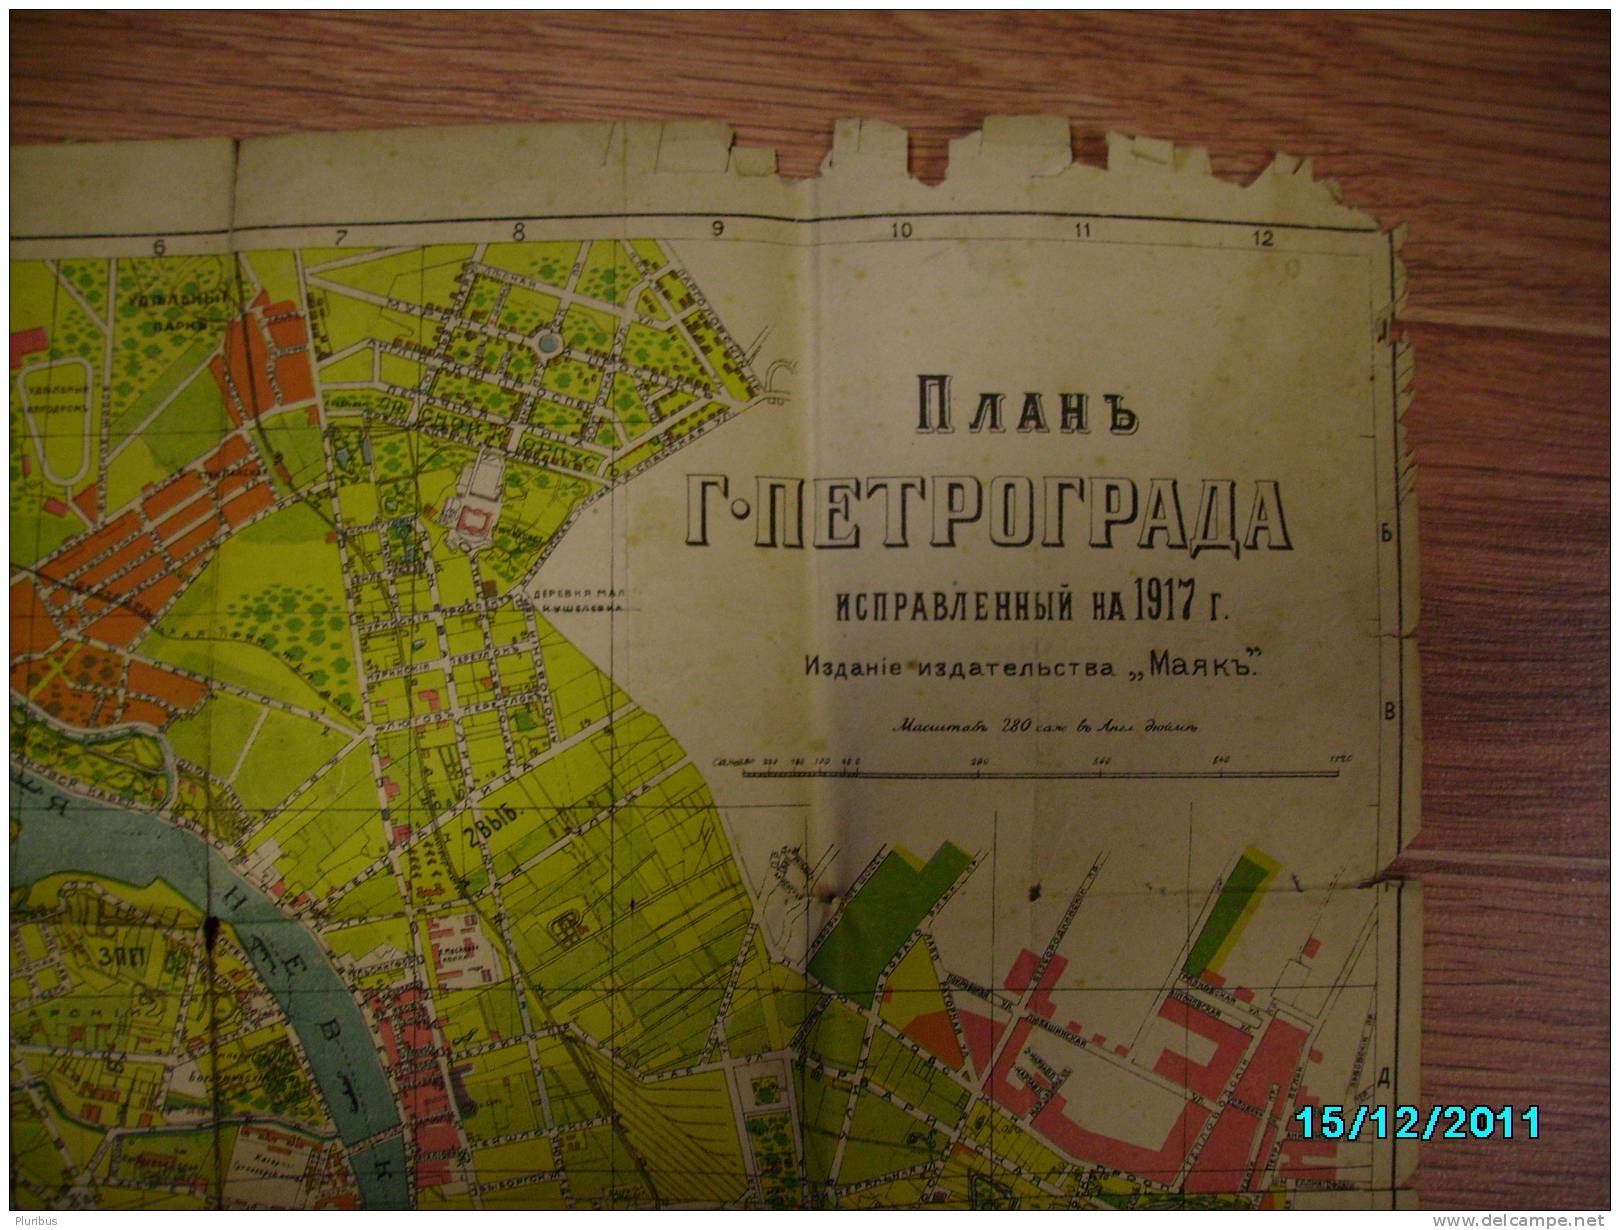 1917 RUSSIA MAP OF ST. PETERSBURG, PETERBURG, PETROGRAD, - Geographical Maps